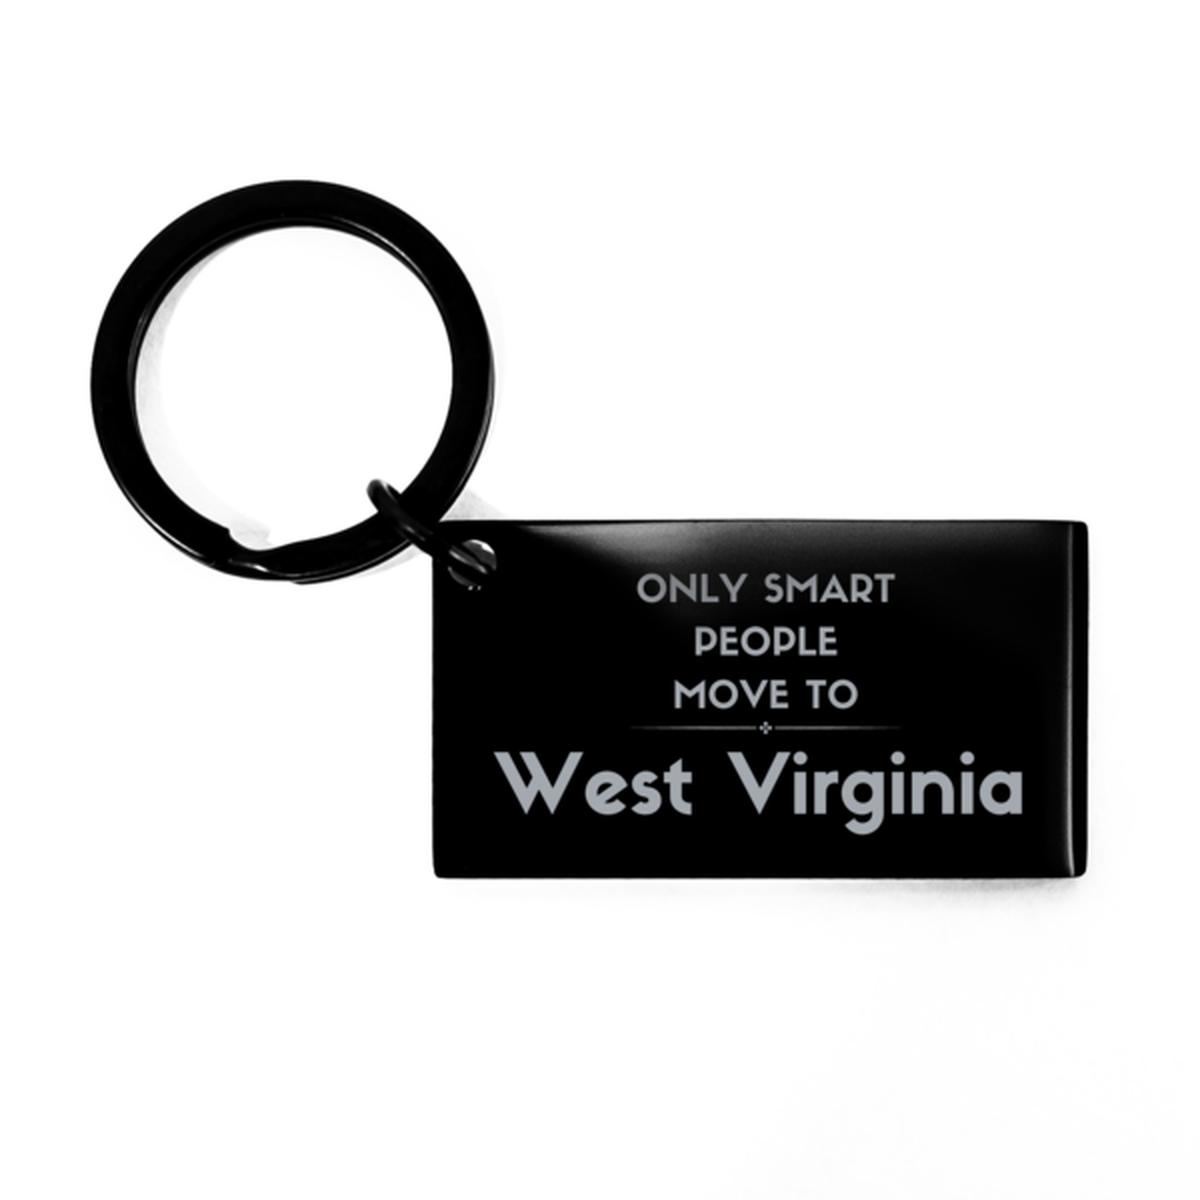 Only smart people move to West Virginia Keychain, Gag Gifts For West Virginia, Move to West Virginia Gifts for Friends Coworker Funny Saying Quote